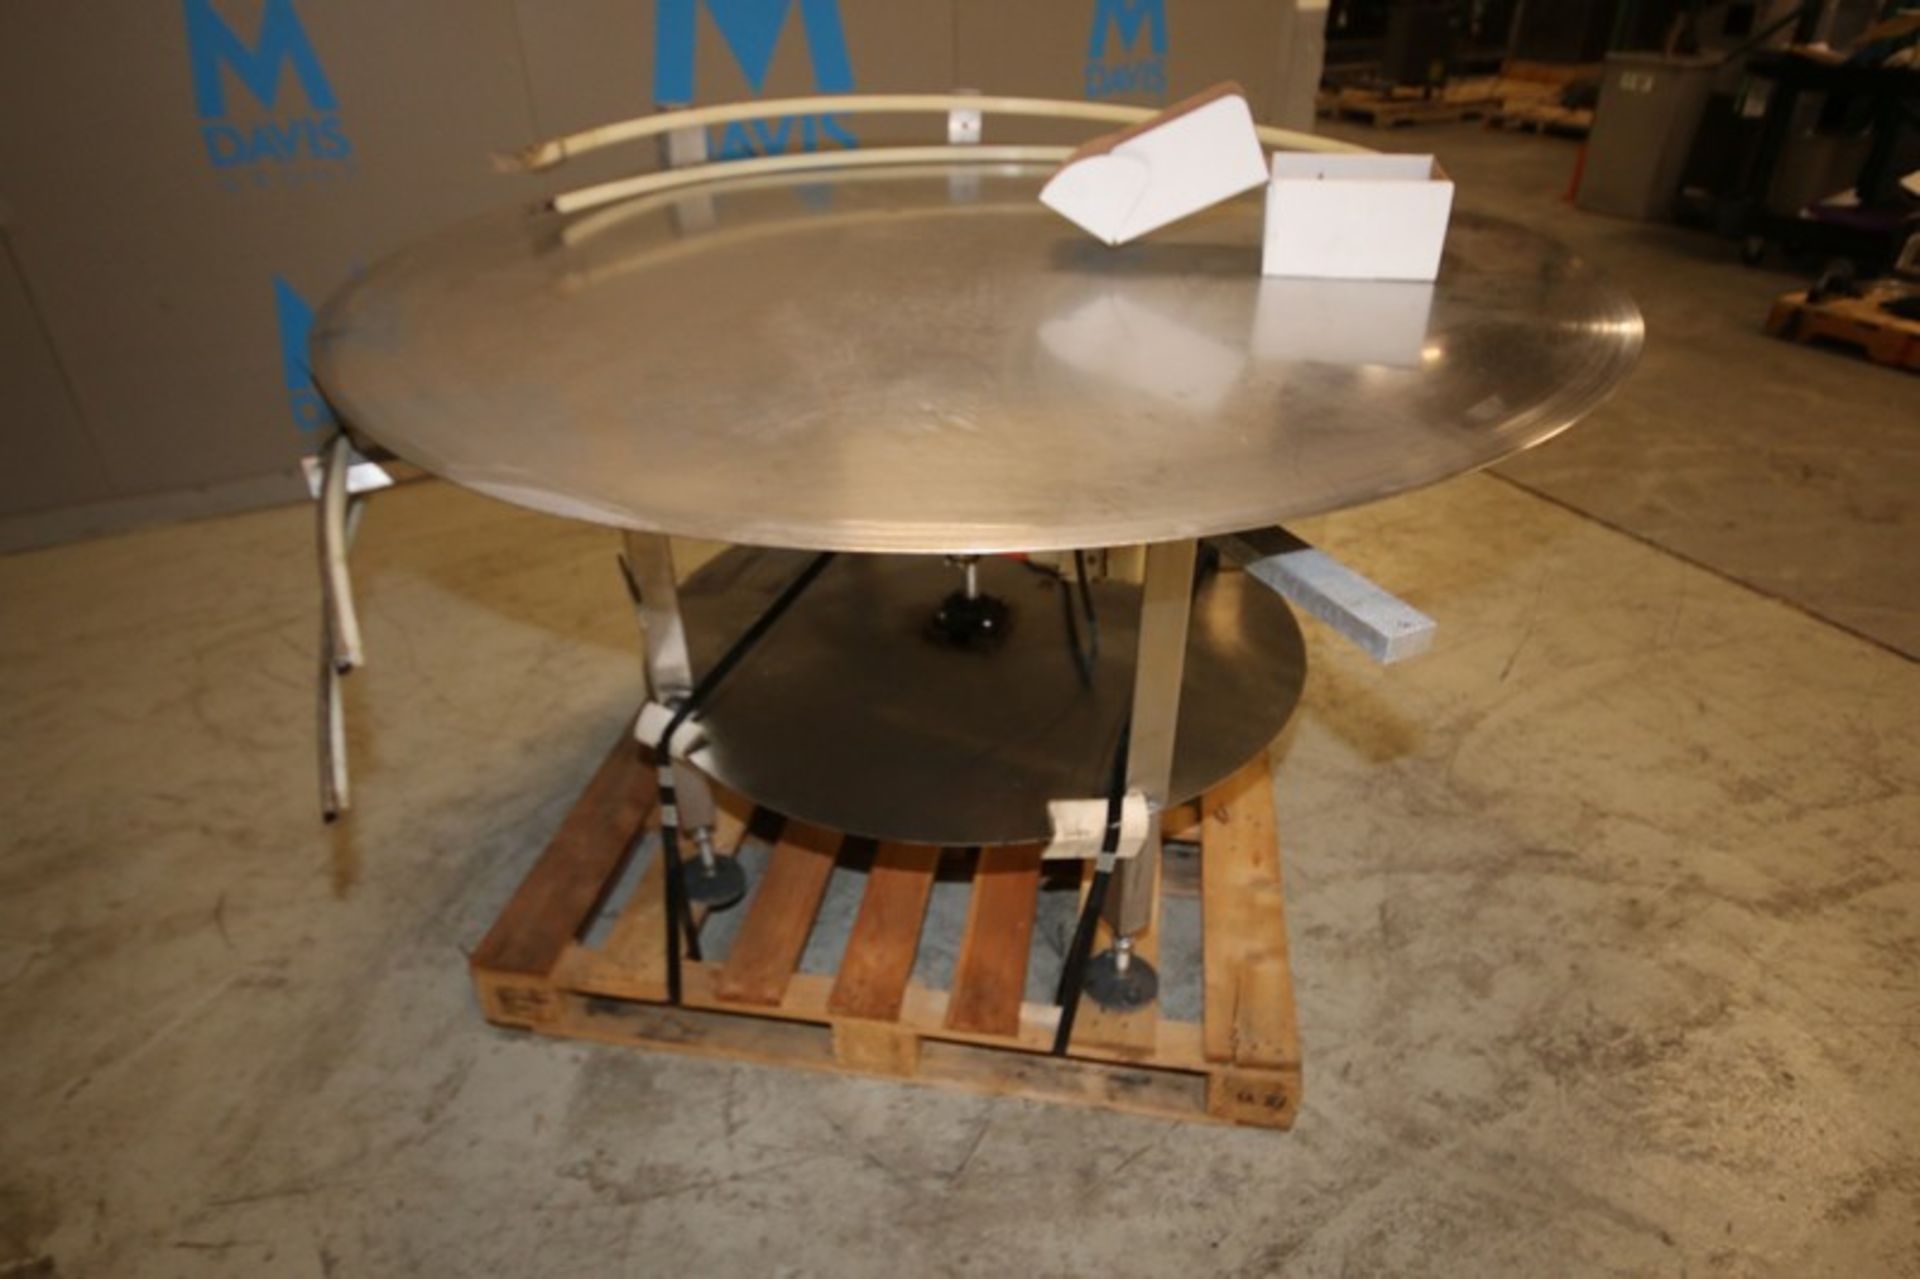 60" Round S/S Conveyor Accumulation Table, 34" H, with Drive, Includes New Automation Direct - Image 5 of 7